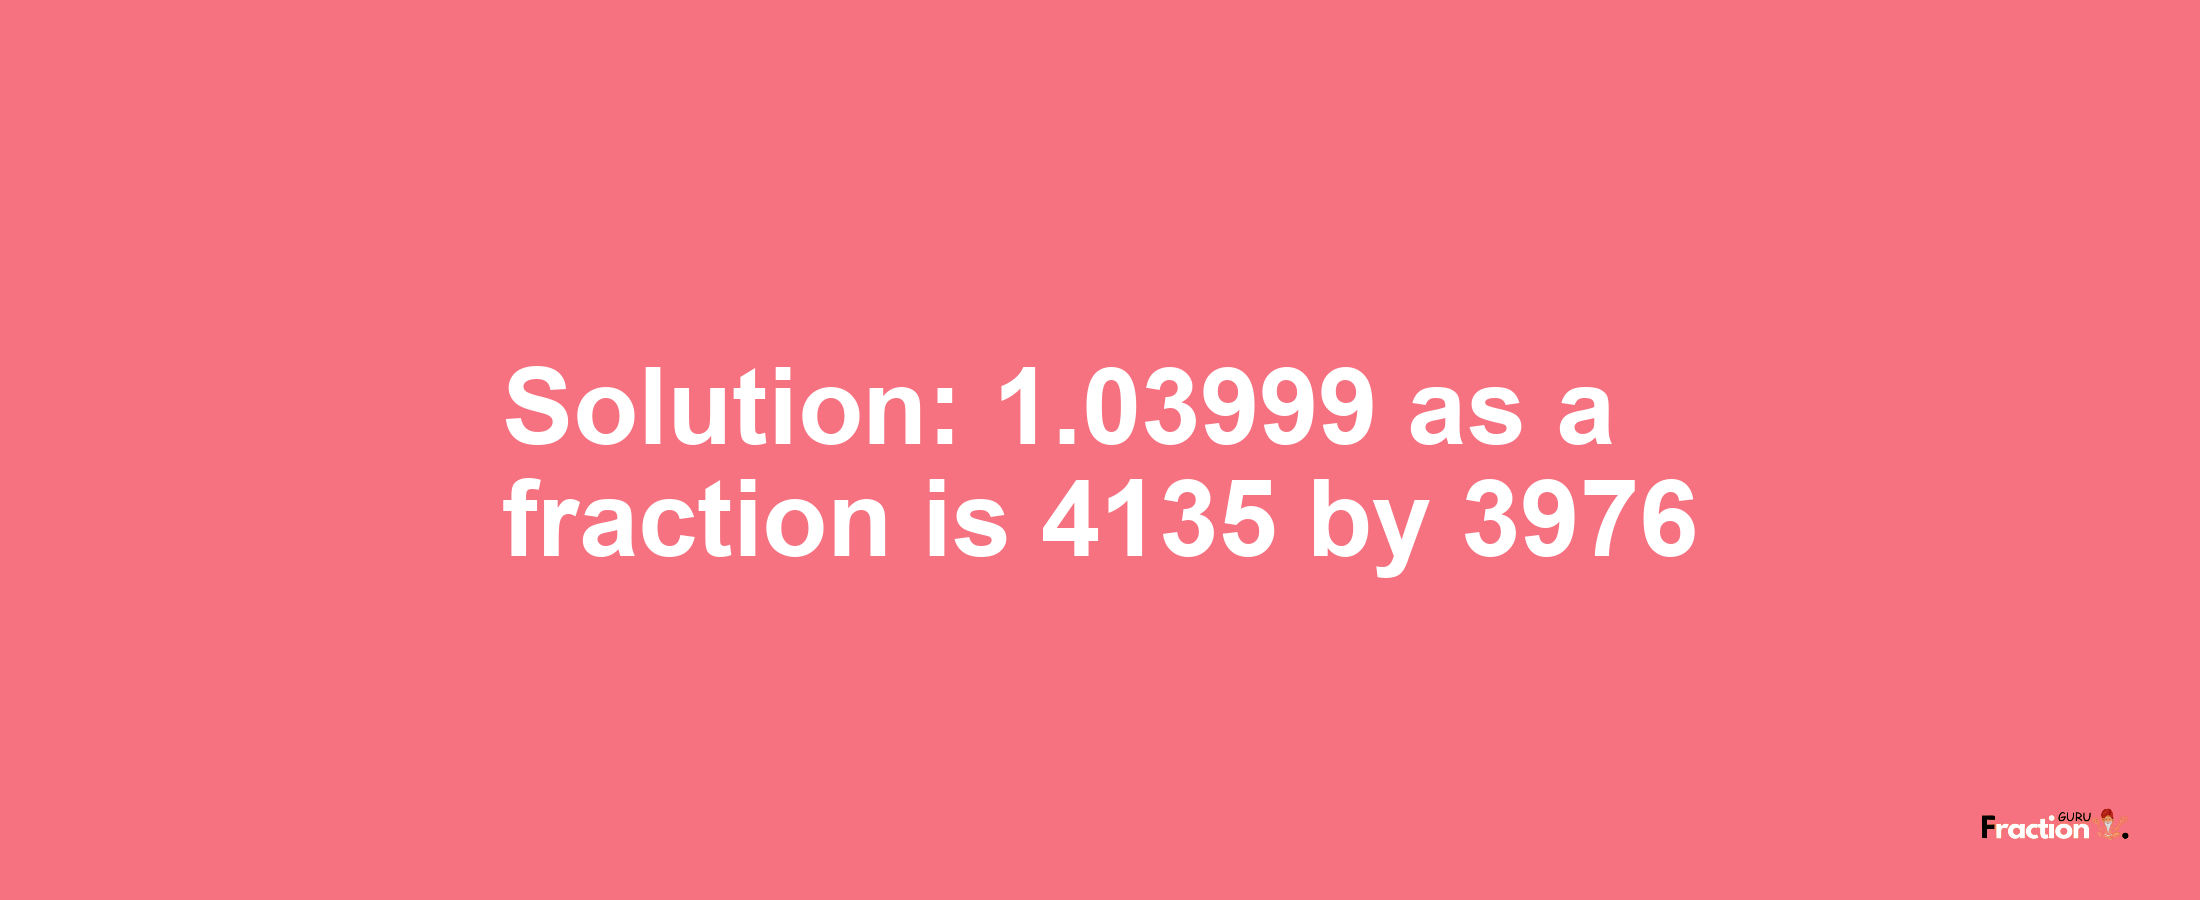 Solution:1.03999 as a fraction is 4135/3976